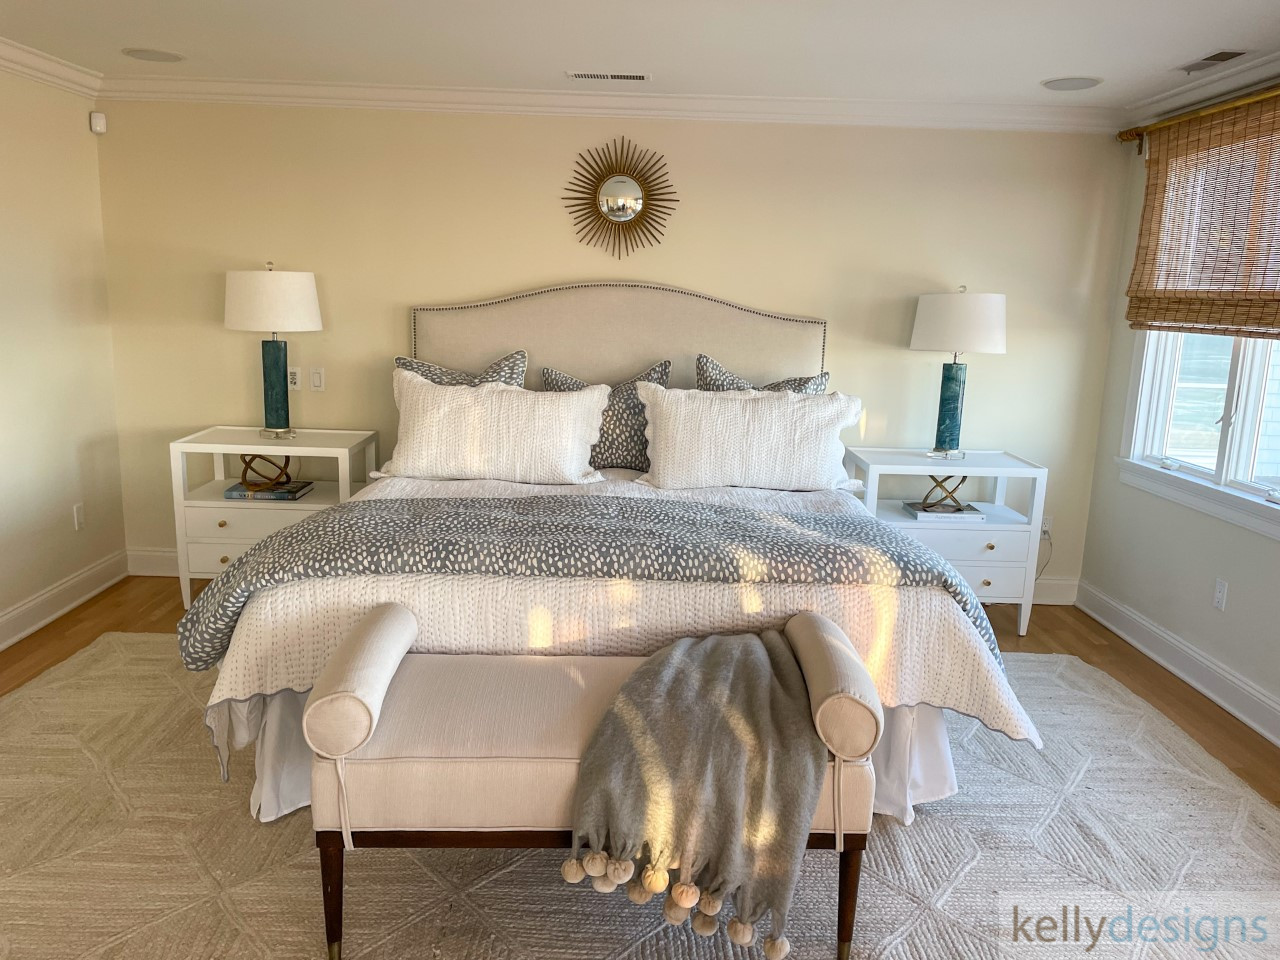  Home Staging By Kellydesigns On Fairfield Beach Road